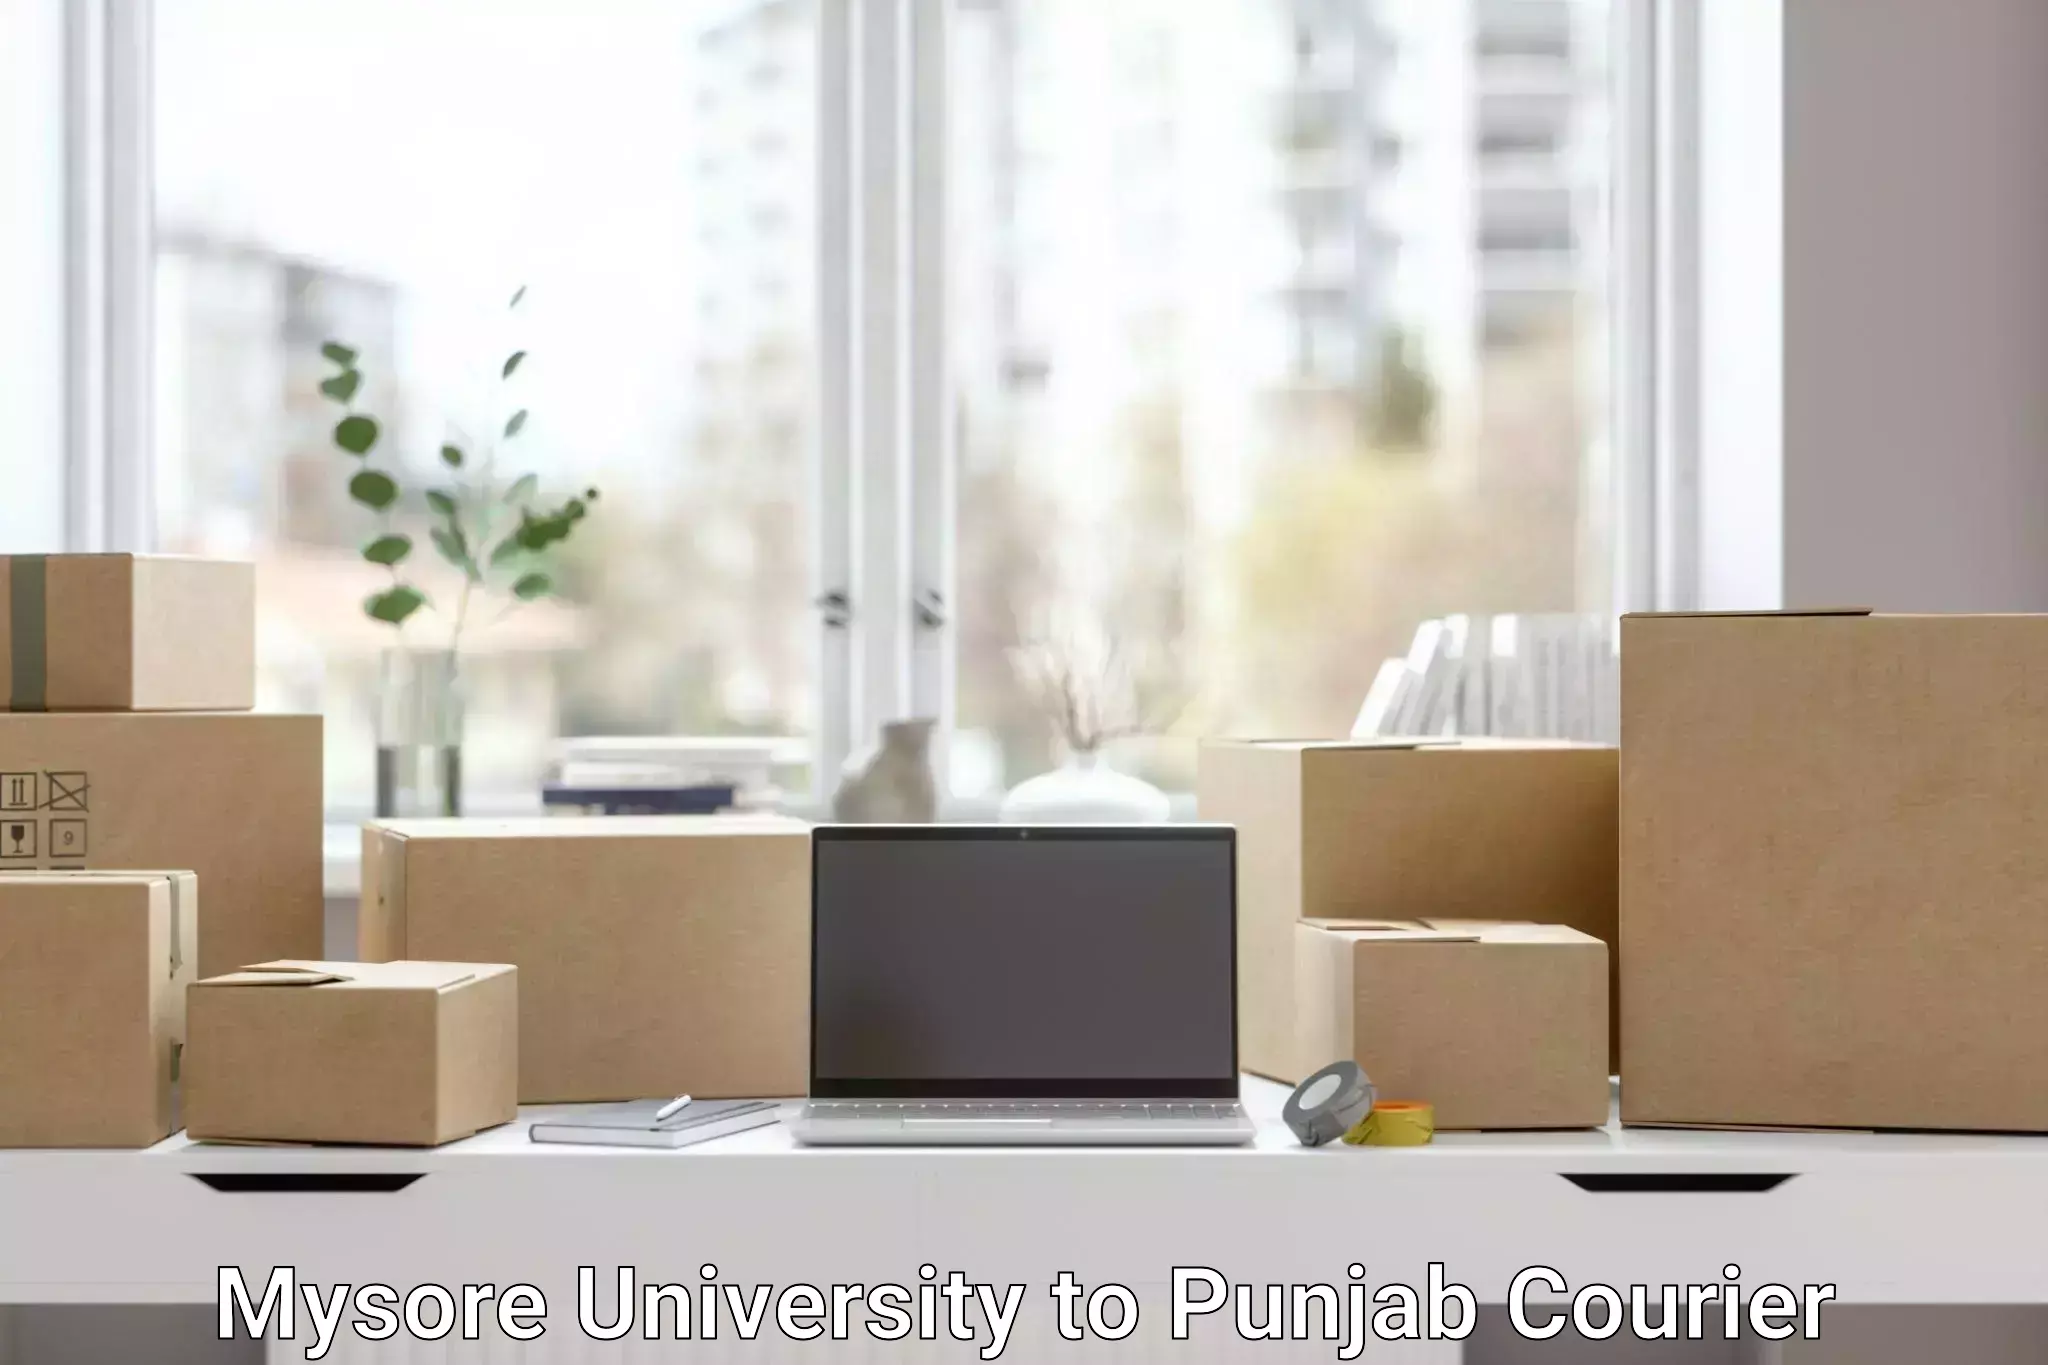 Professional delivery solutions in Mysore University to Punjab